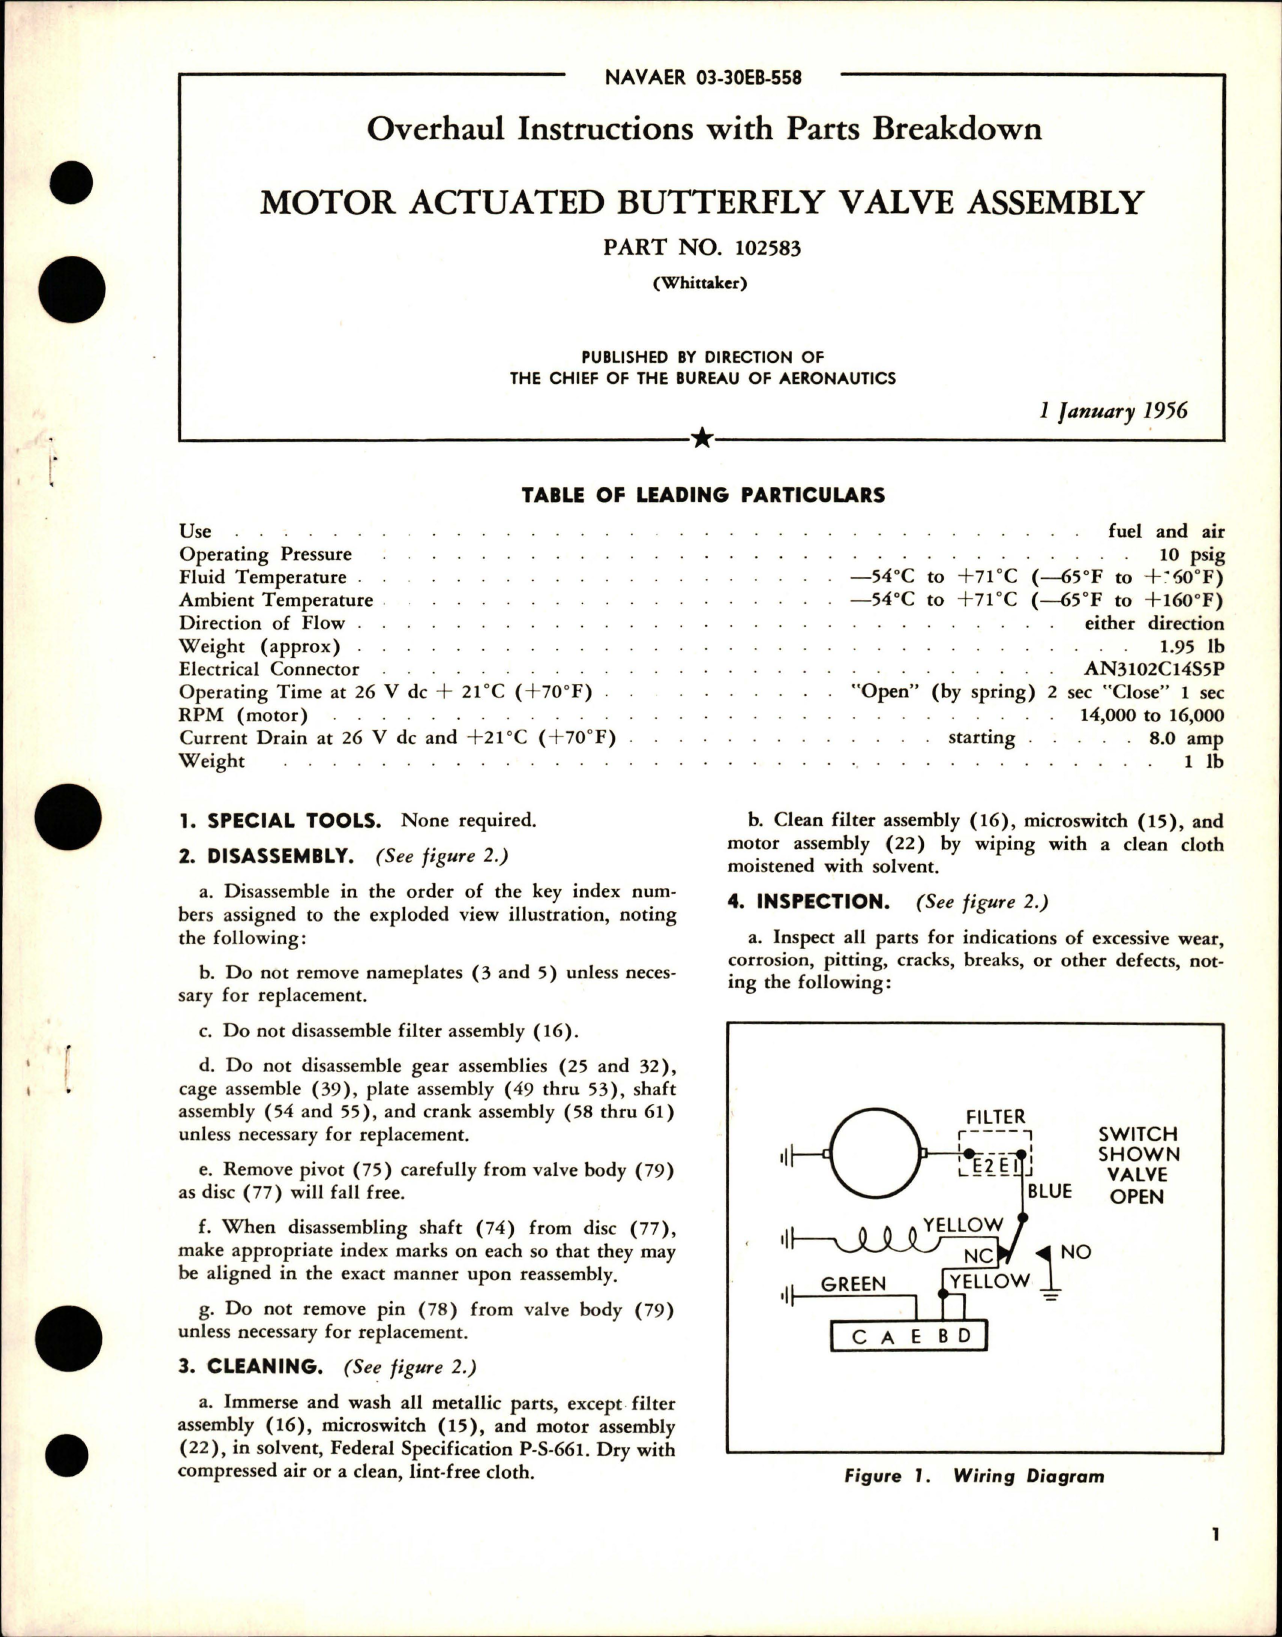 Sample page 1 from AirCorps Library document: Overhaul Instructions with Parts for Motor Actuated Butterfly Valve Assembly - Part 102583